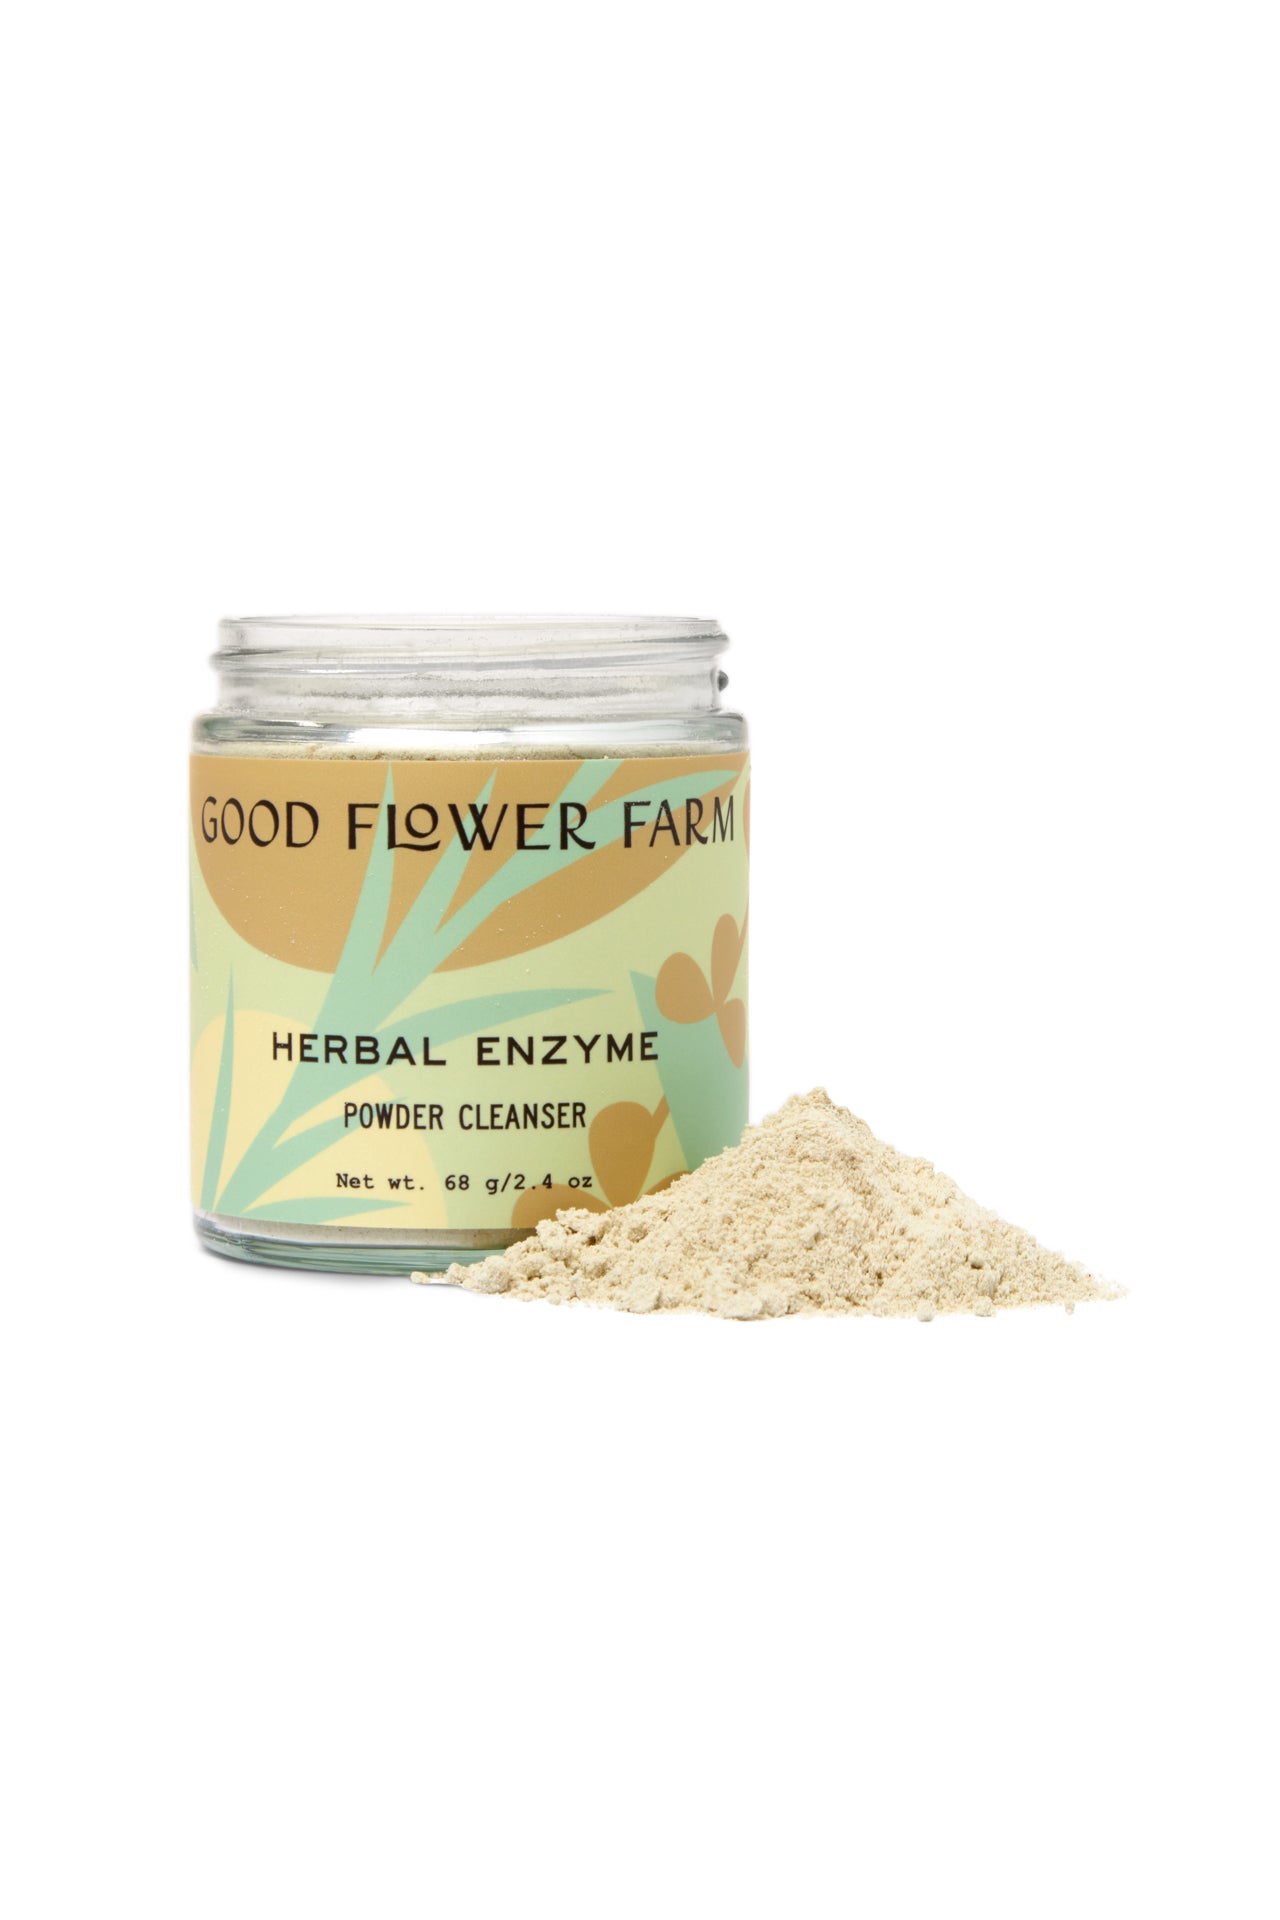 NEW! Herbal Enzyme Powder Cleanser